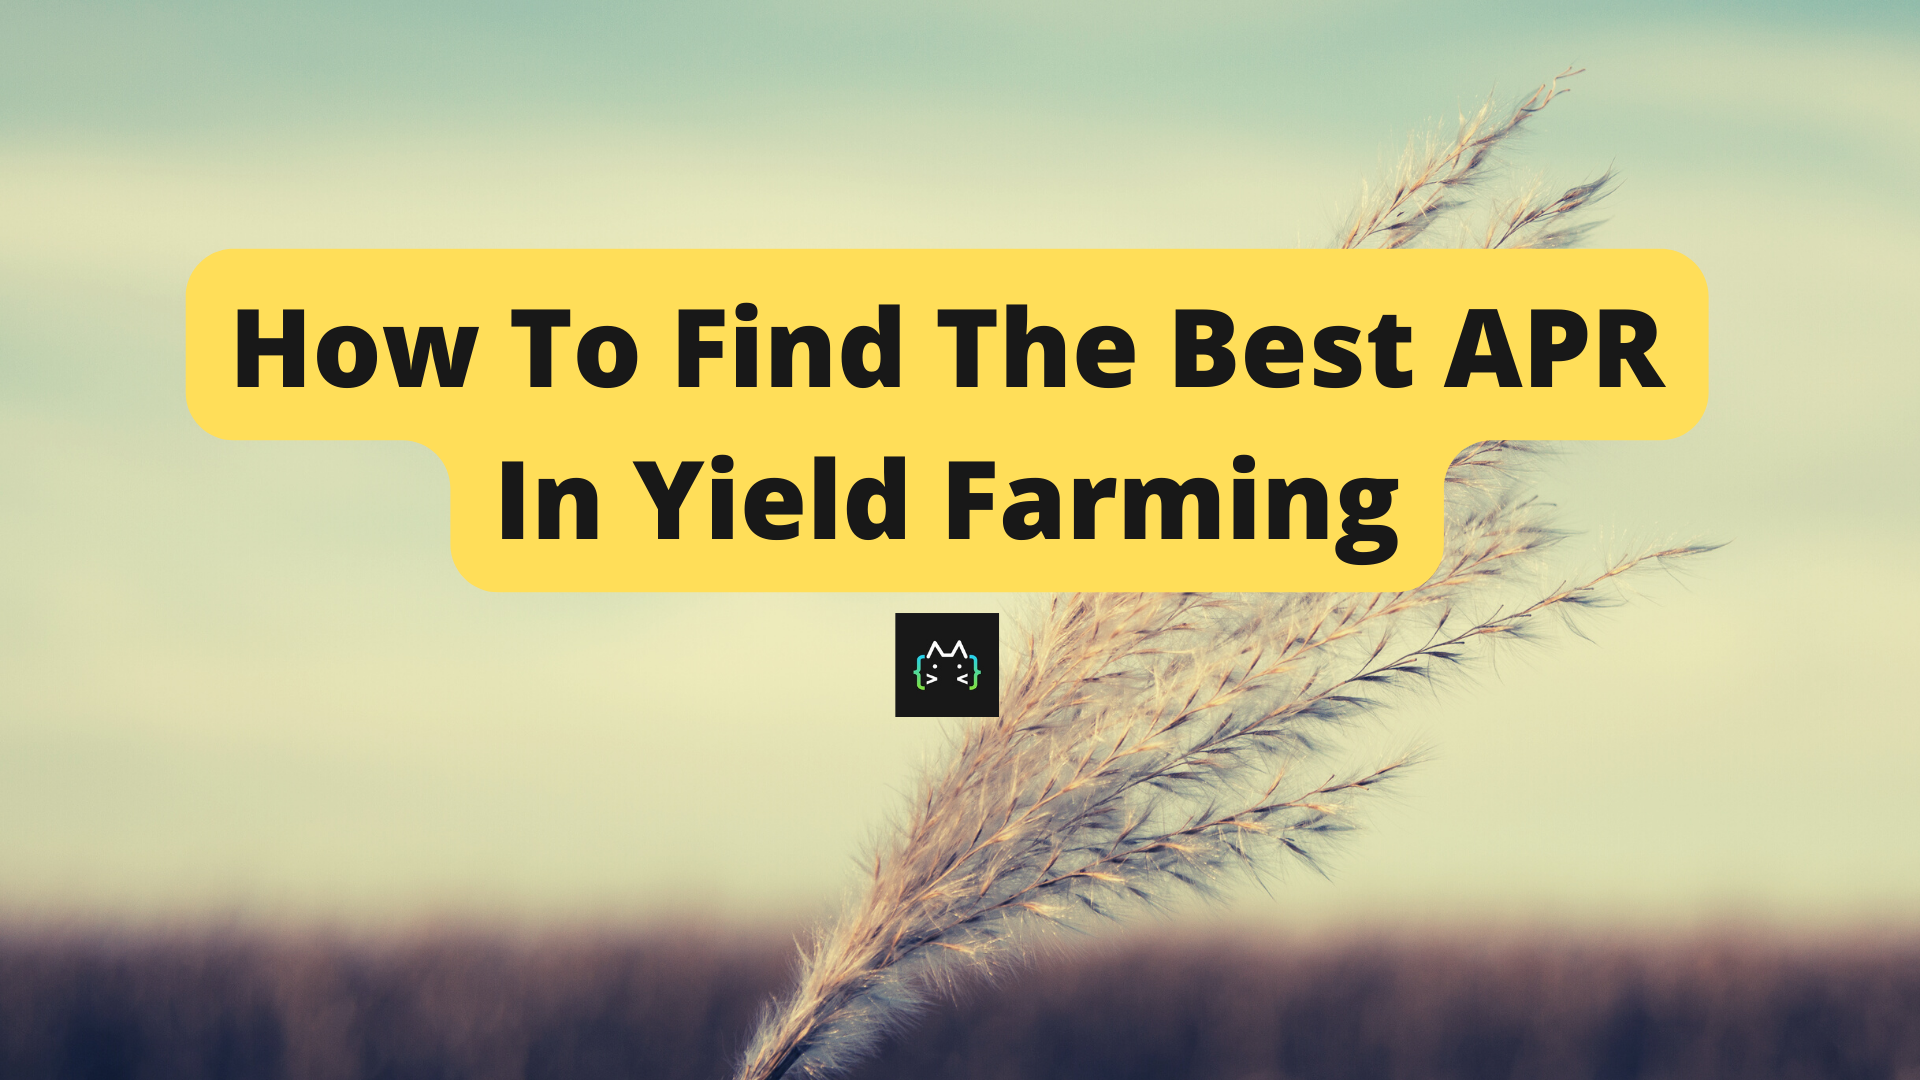 How To Find The Best APR In Yield Farming